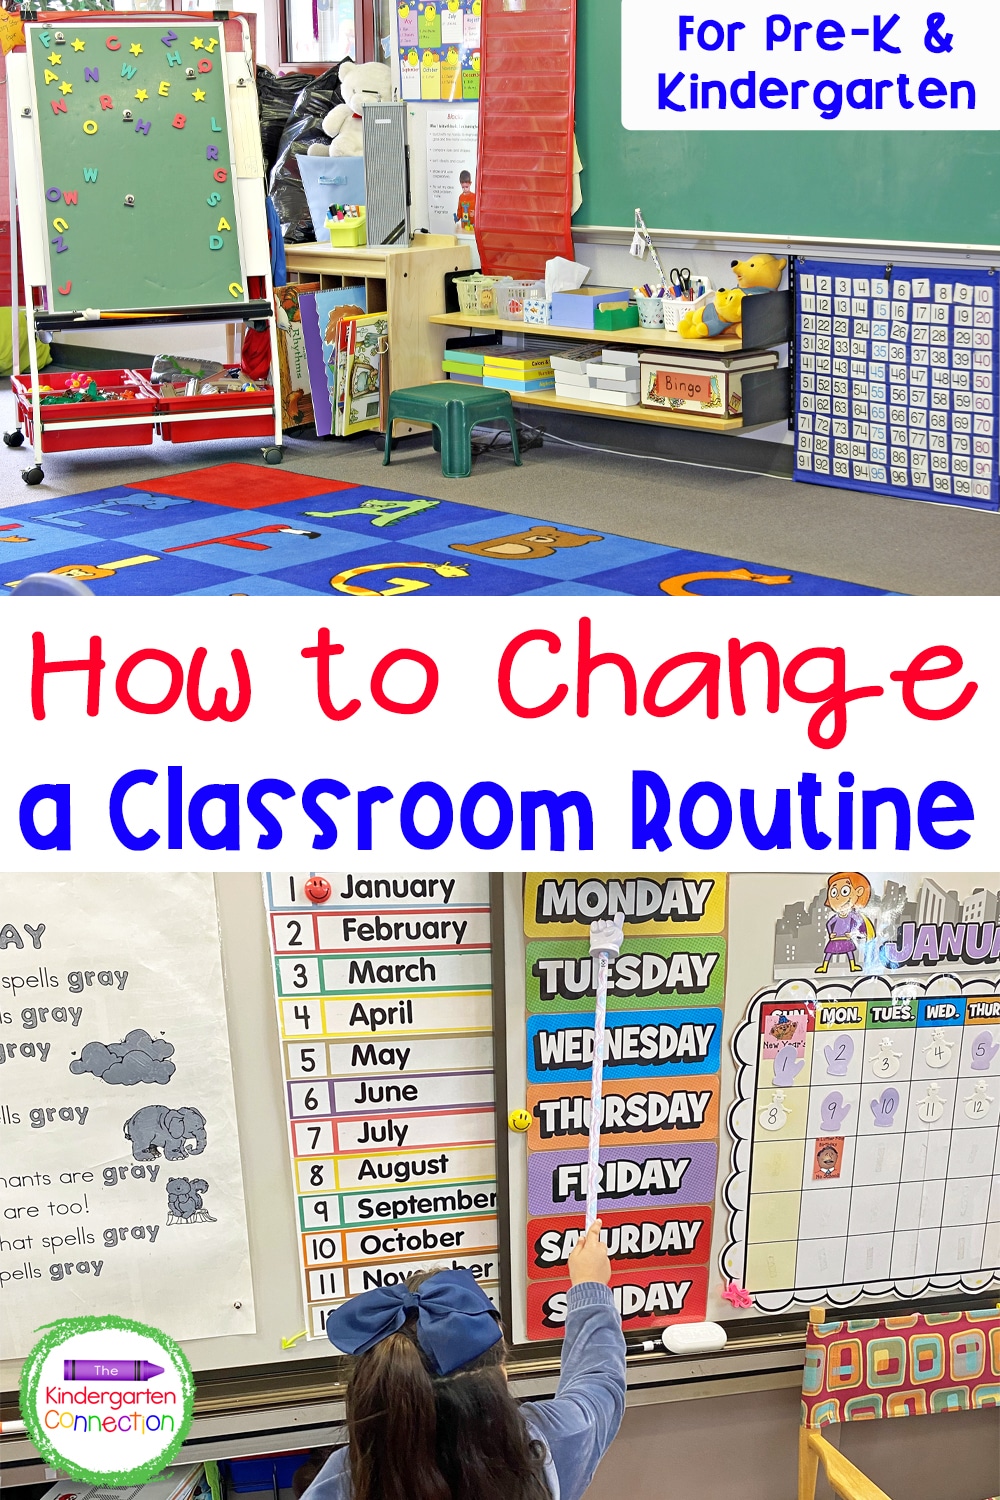 In Pre-K and Kindergarten, routines and consistency are important. Here's how to change a classroom routine to make it even more effective!